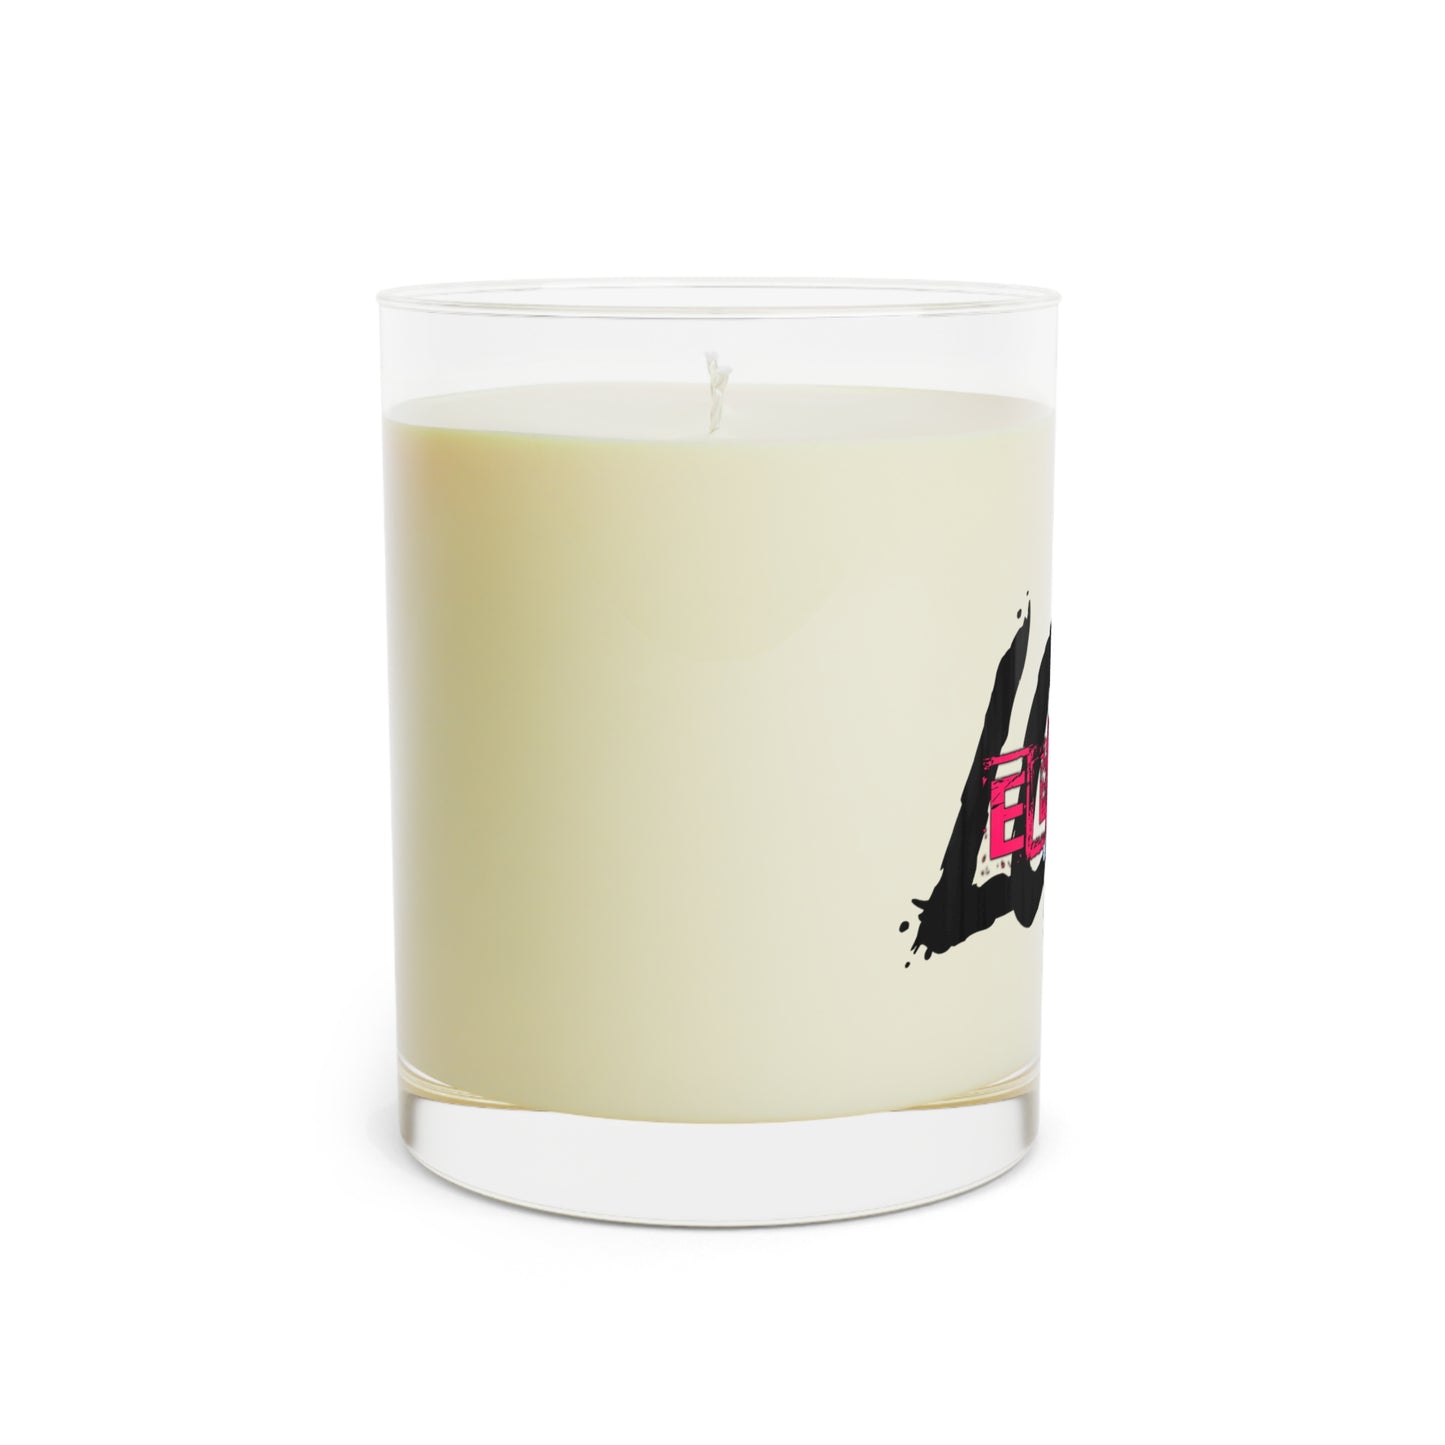 EL423'S Gypsy Love Spell  /on Glass /Scented Candle